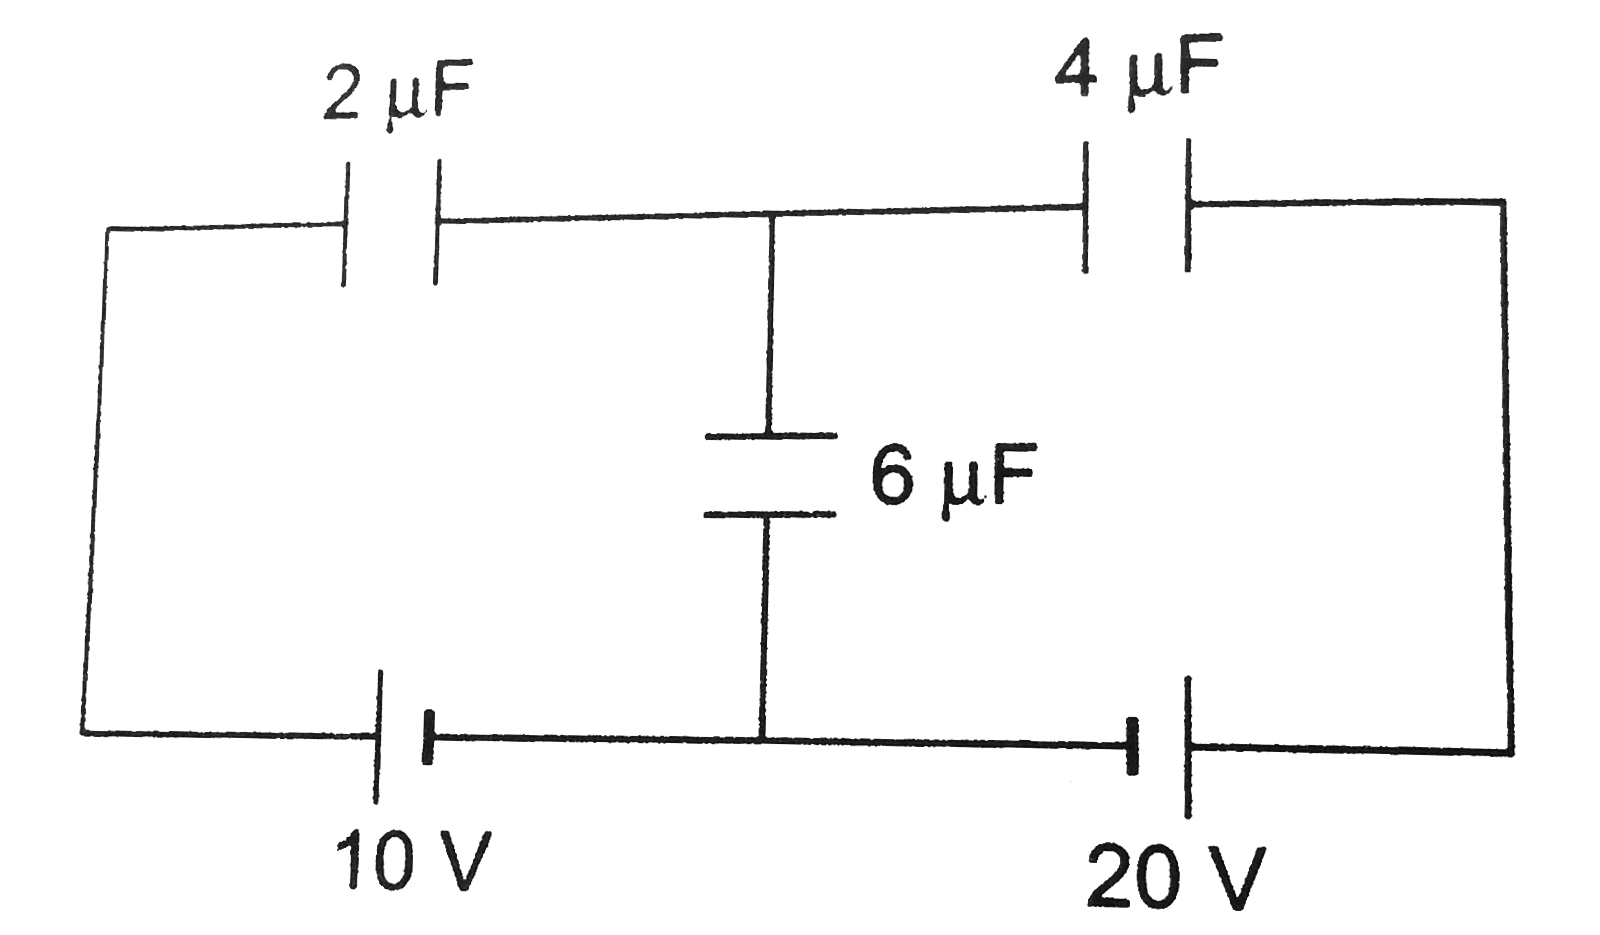 Find the charges on the three capacitors shown in figure